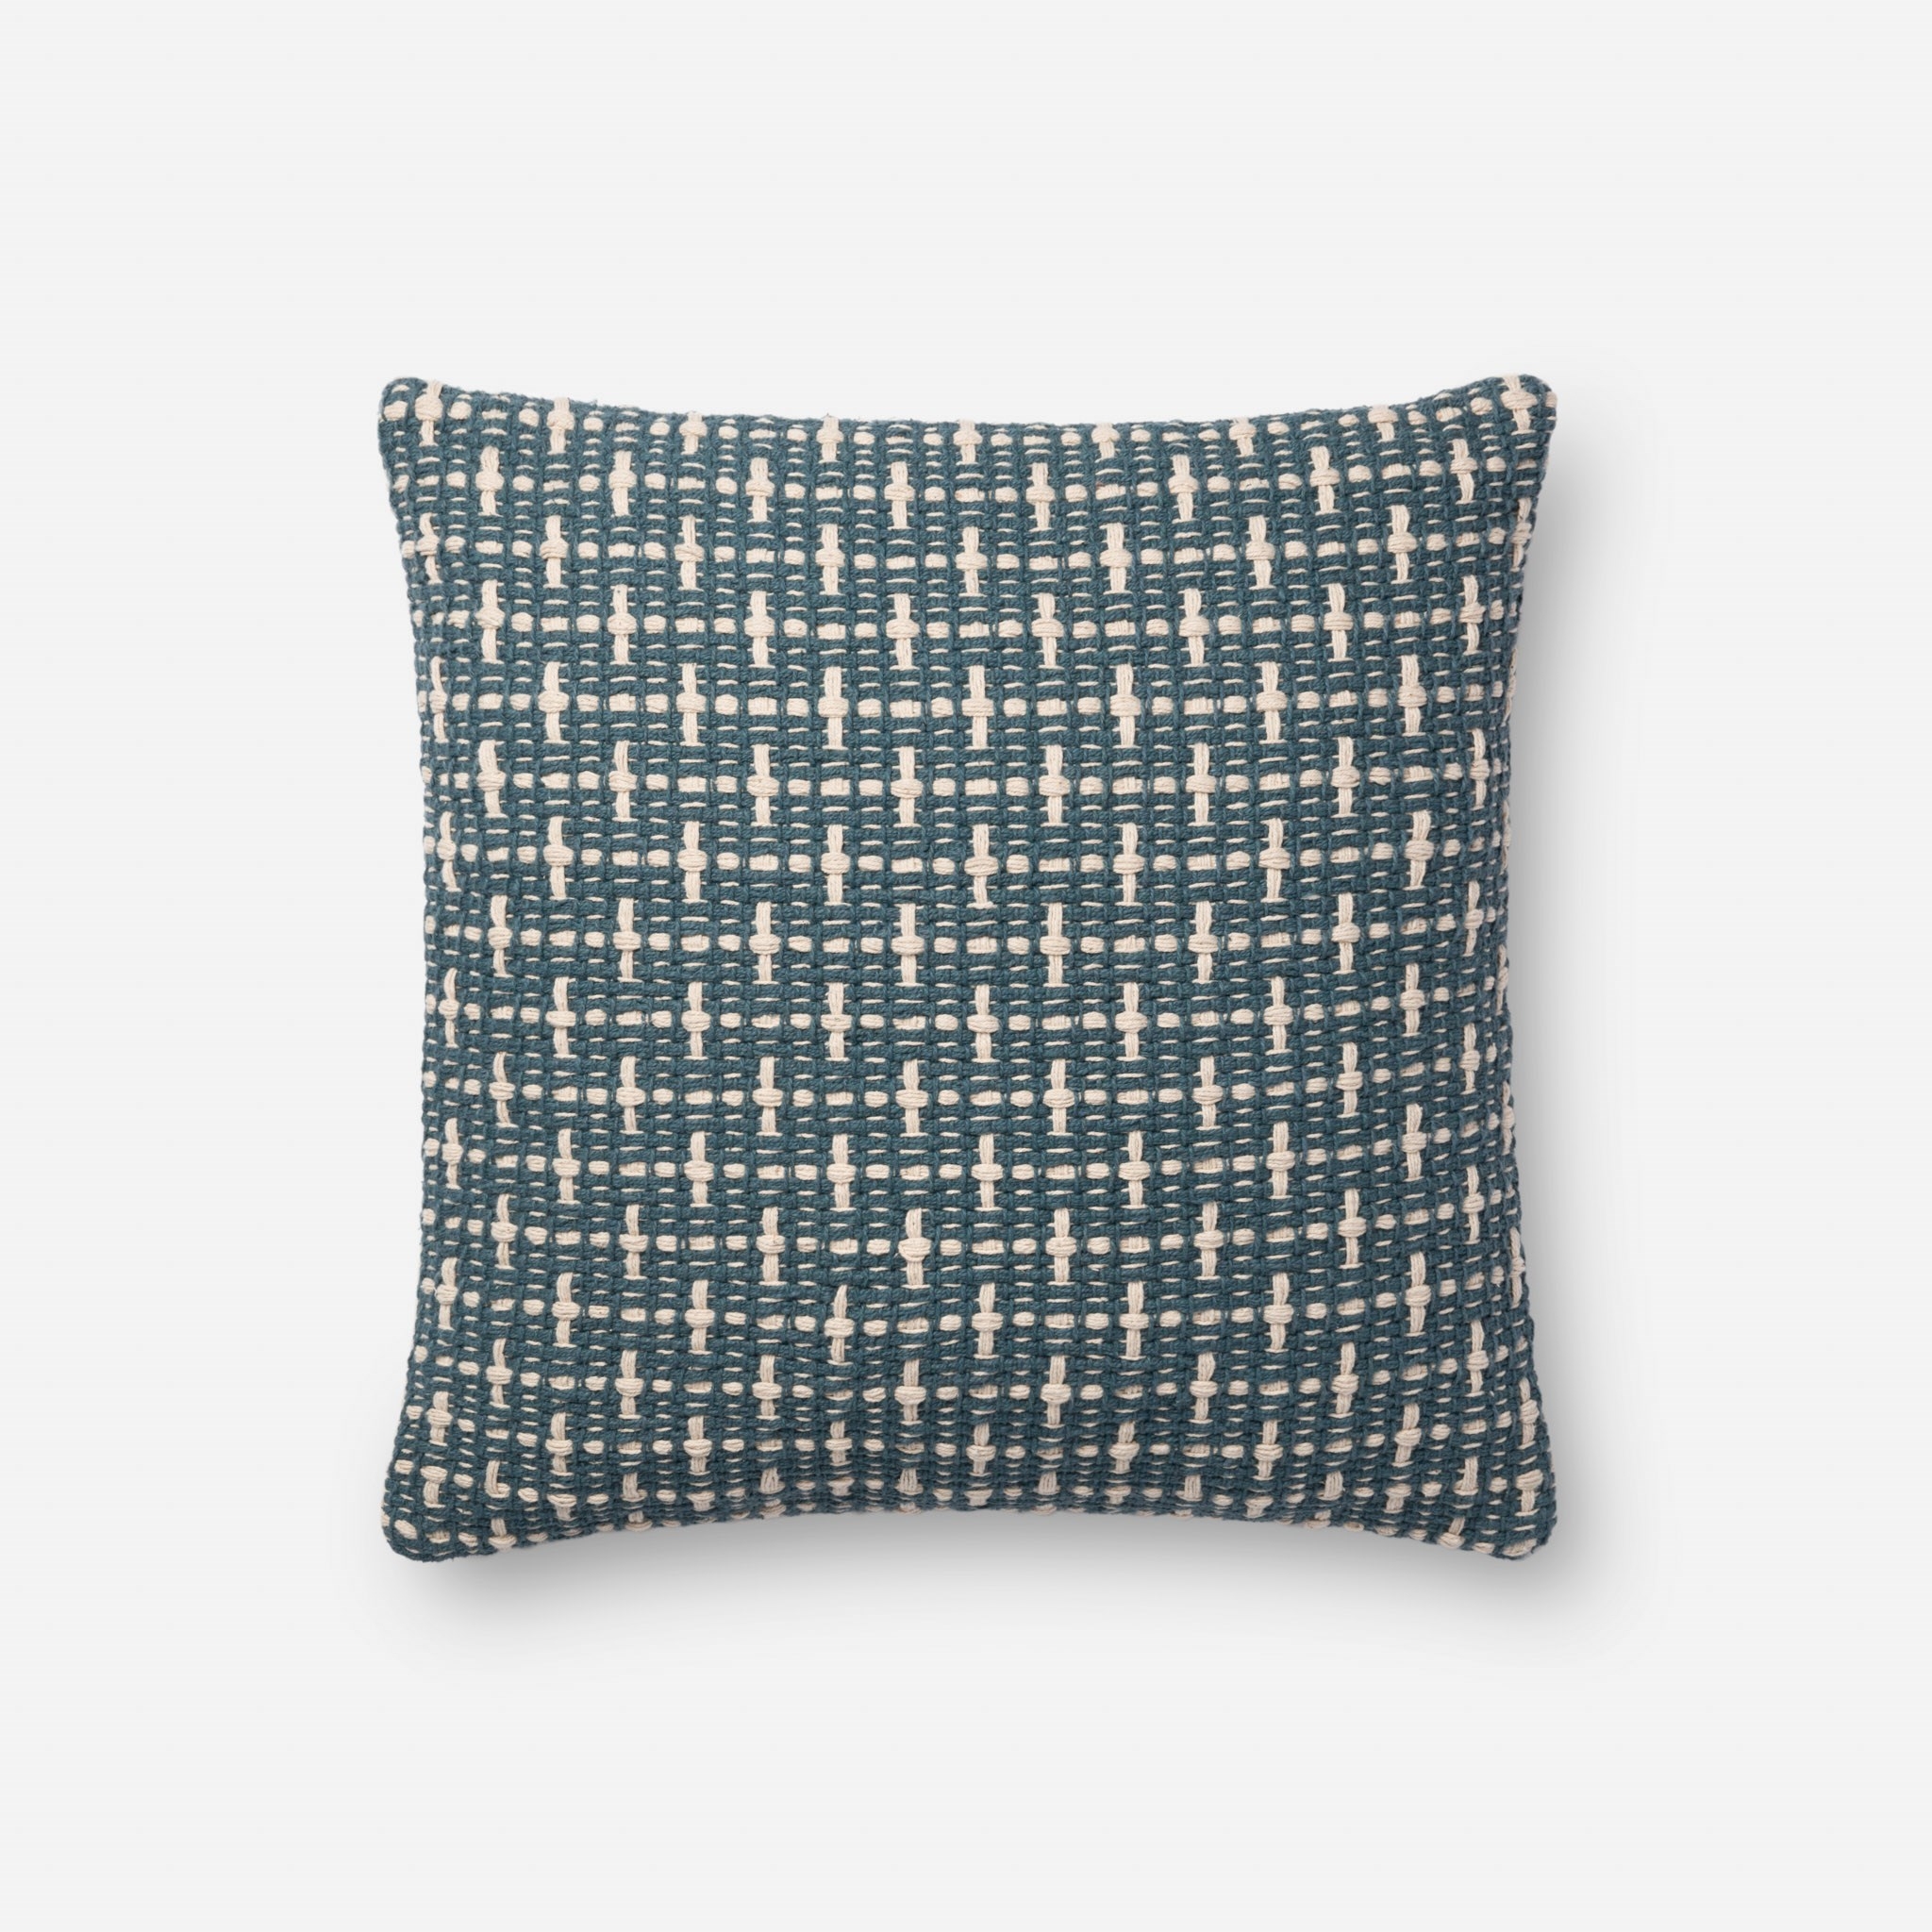 PILLOWS - BLUE 18x18 cover - Image 0